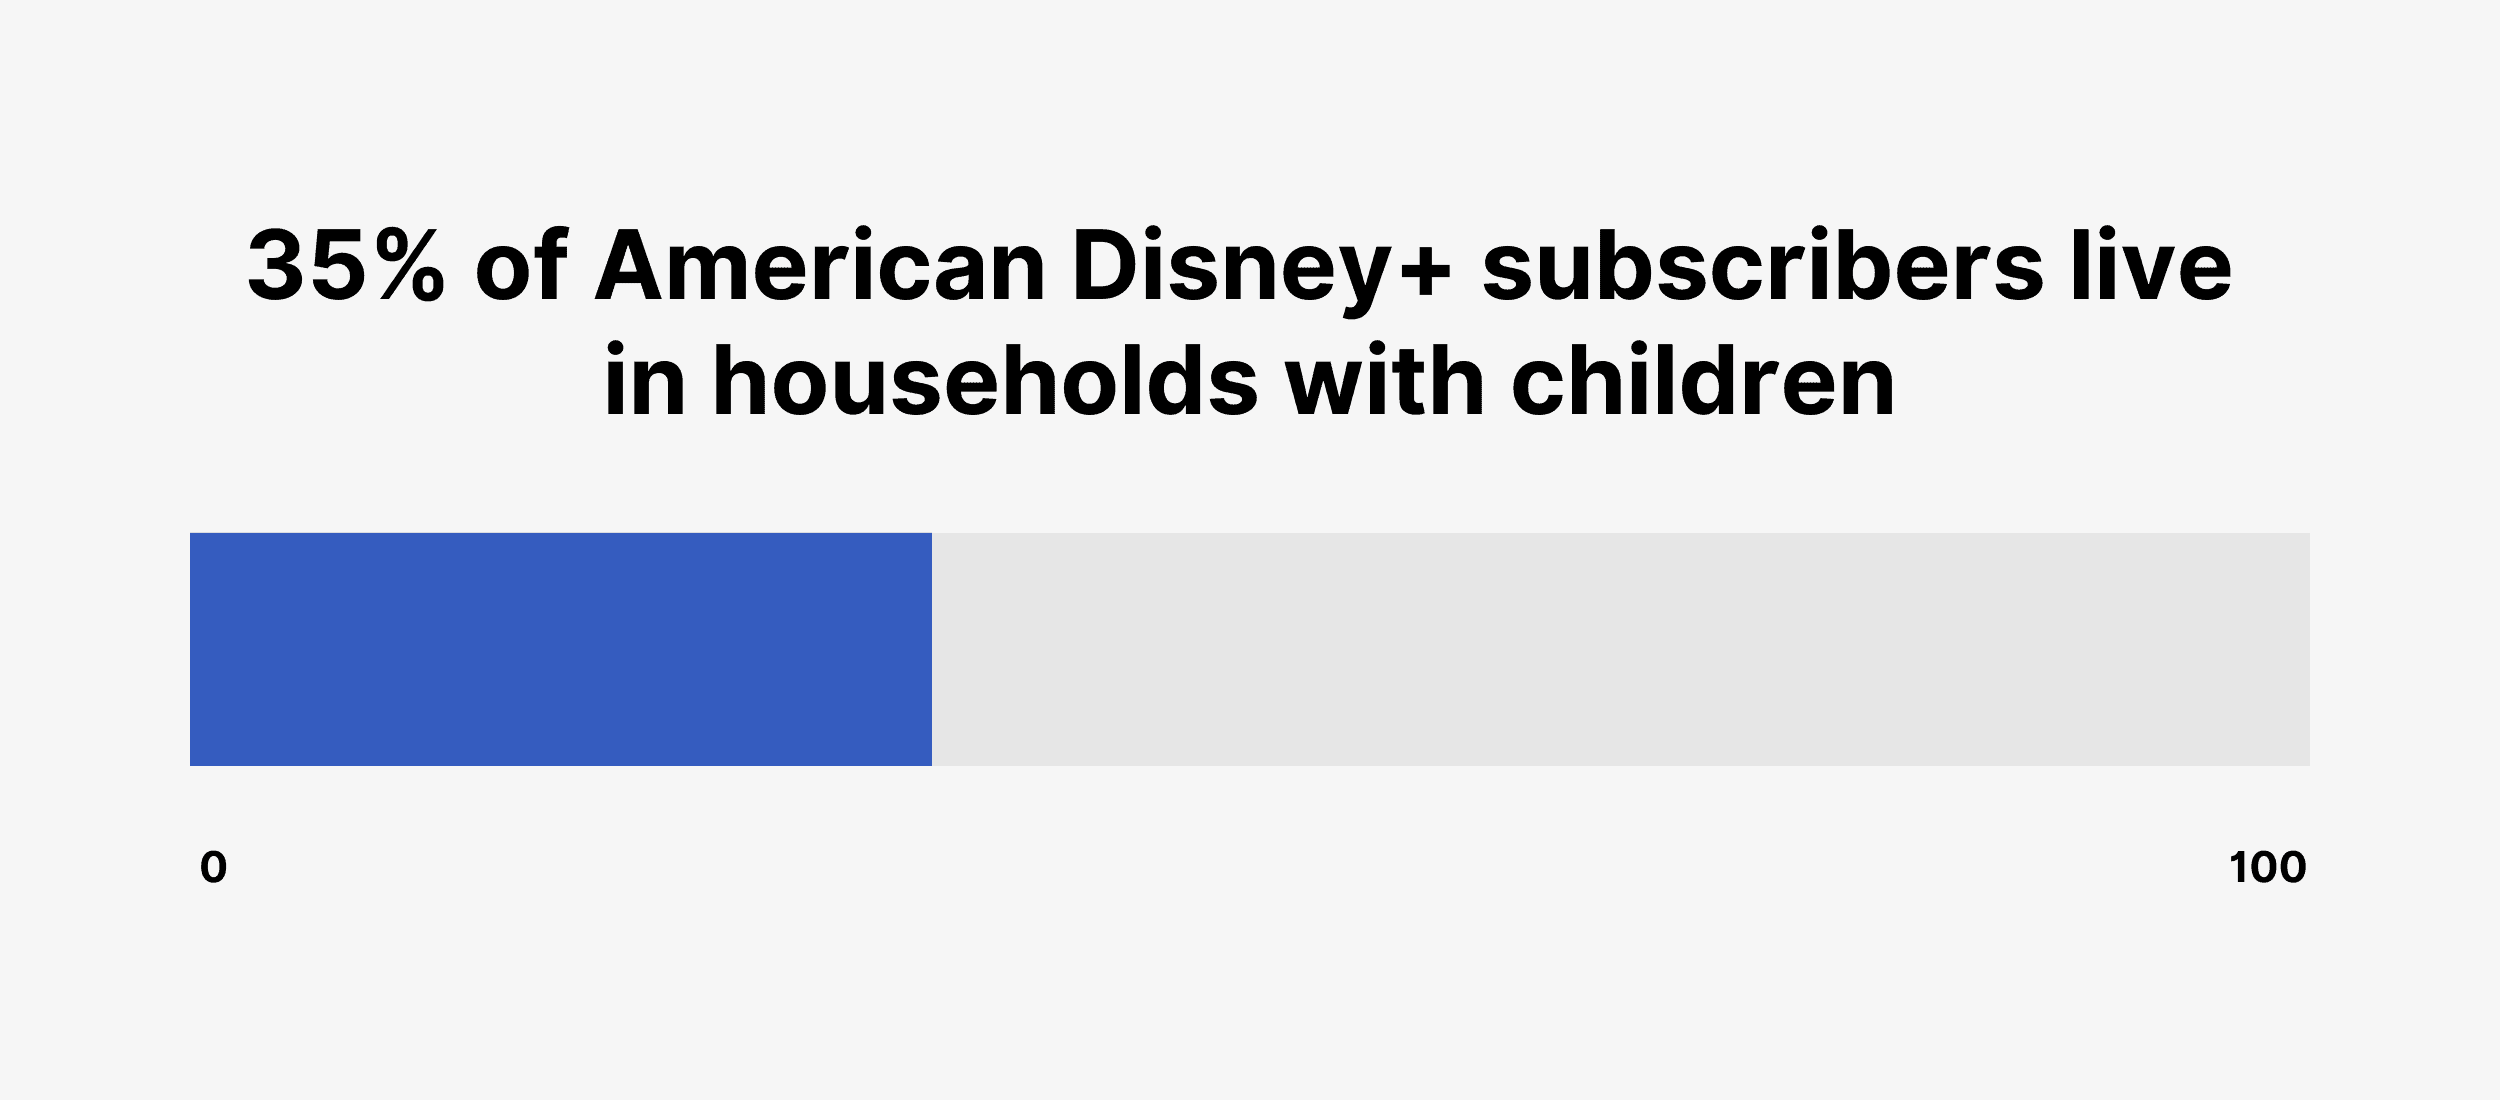 35% of American Disney+ subscribers live in households with children